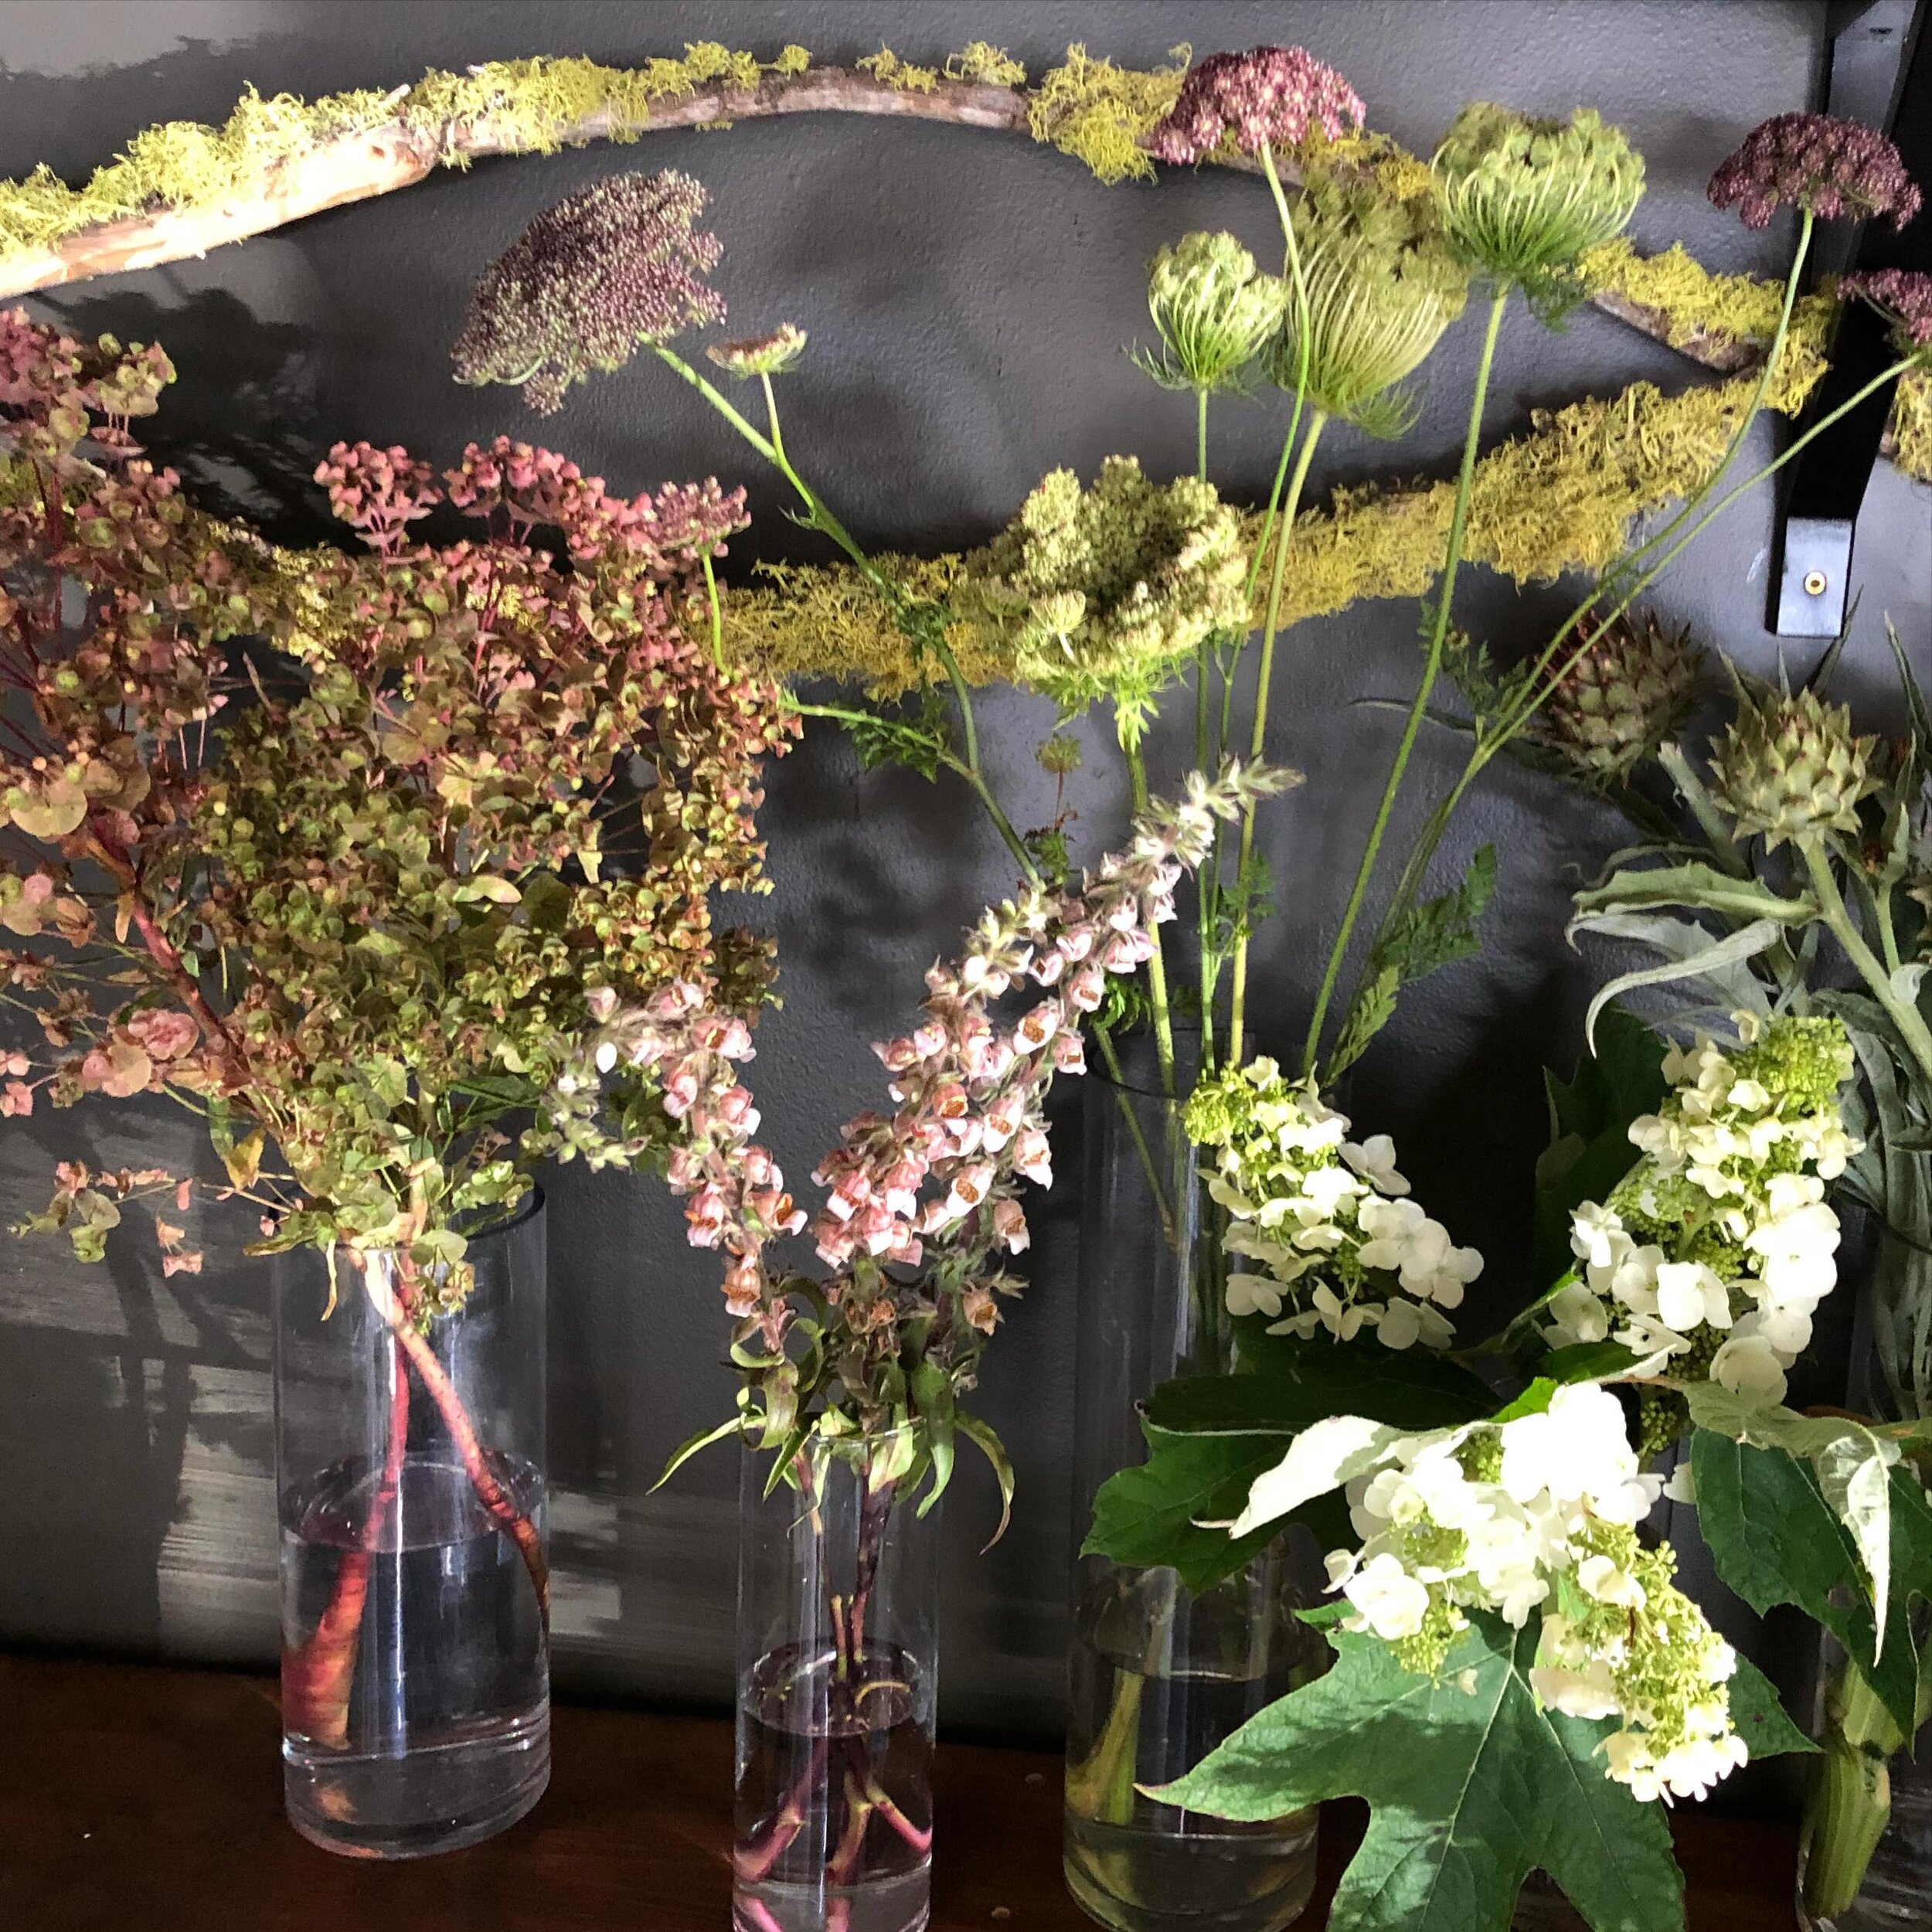 A shop vignette from long ago, featuring some amazing local botanicals. I&rsquo;m lookin&rsquo; at you @fullbloomflowerfarm @b.side.farm.flowers @frontporchfarmer @nbflowercollective! These are some of the first farms I bought blooms from when I star